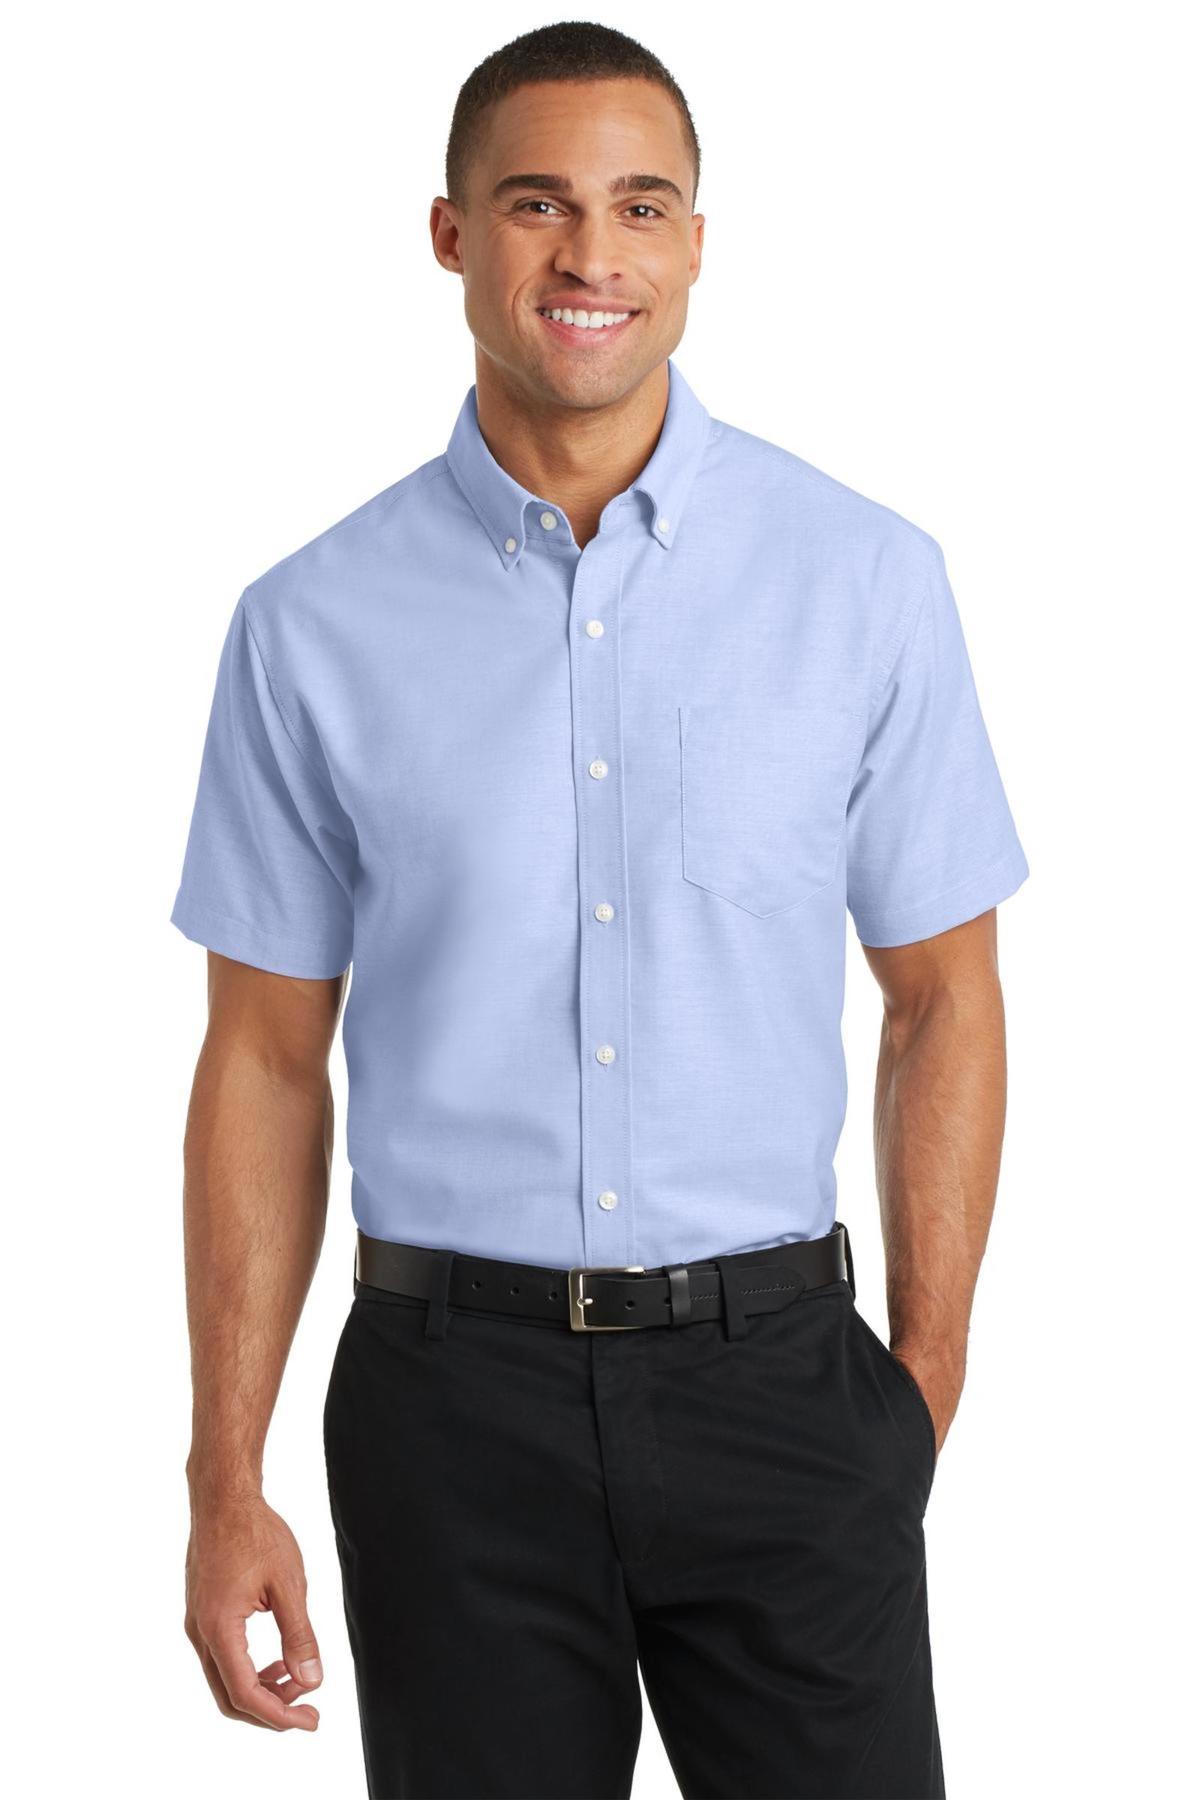 Port Authority Embroidered Men's Short Sleeve SuperPro Oxford Shirt ...